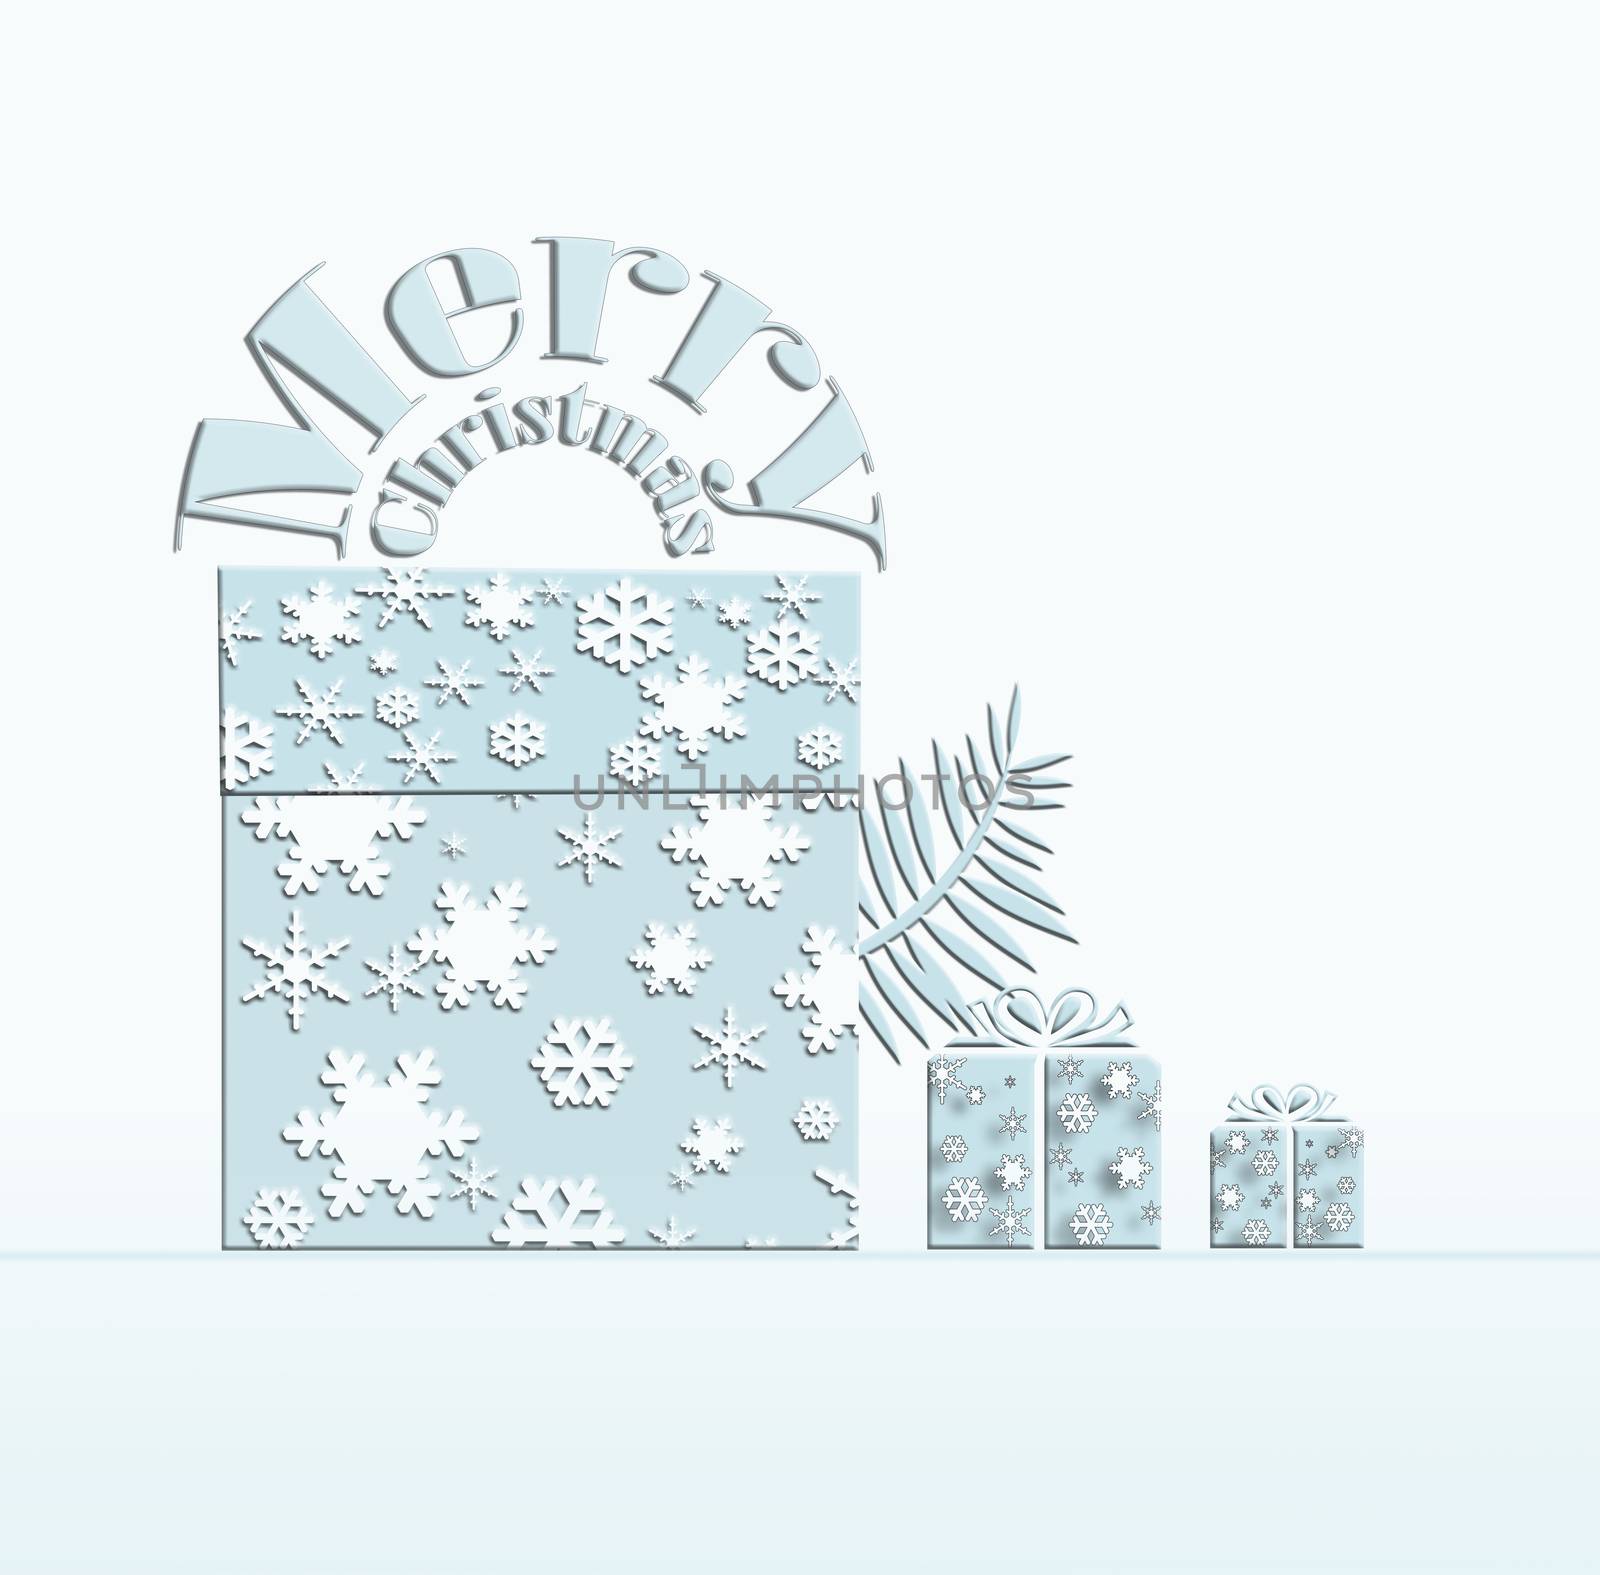 Trendy Pastel blue white winter background with gift boxes made of silver snowflakes and text Merry Christmas. Festive elegant pattern, chic holiday banner. Copy space. 3D illustration